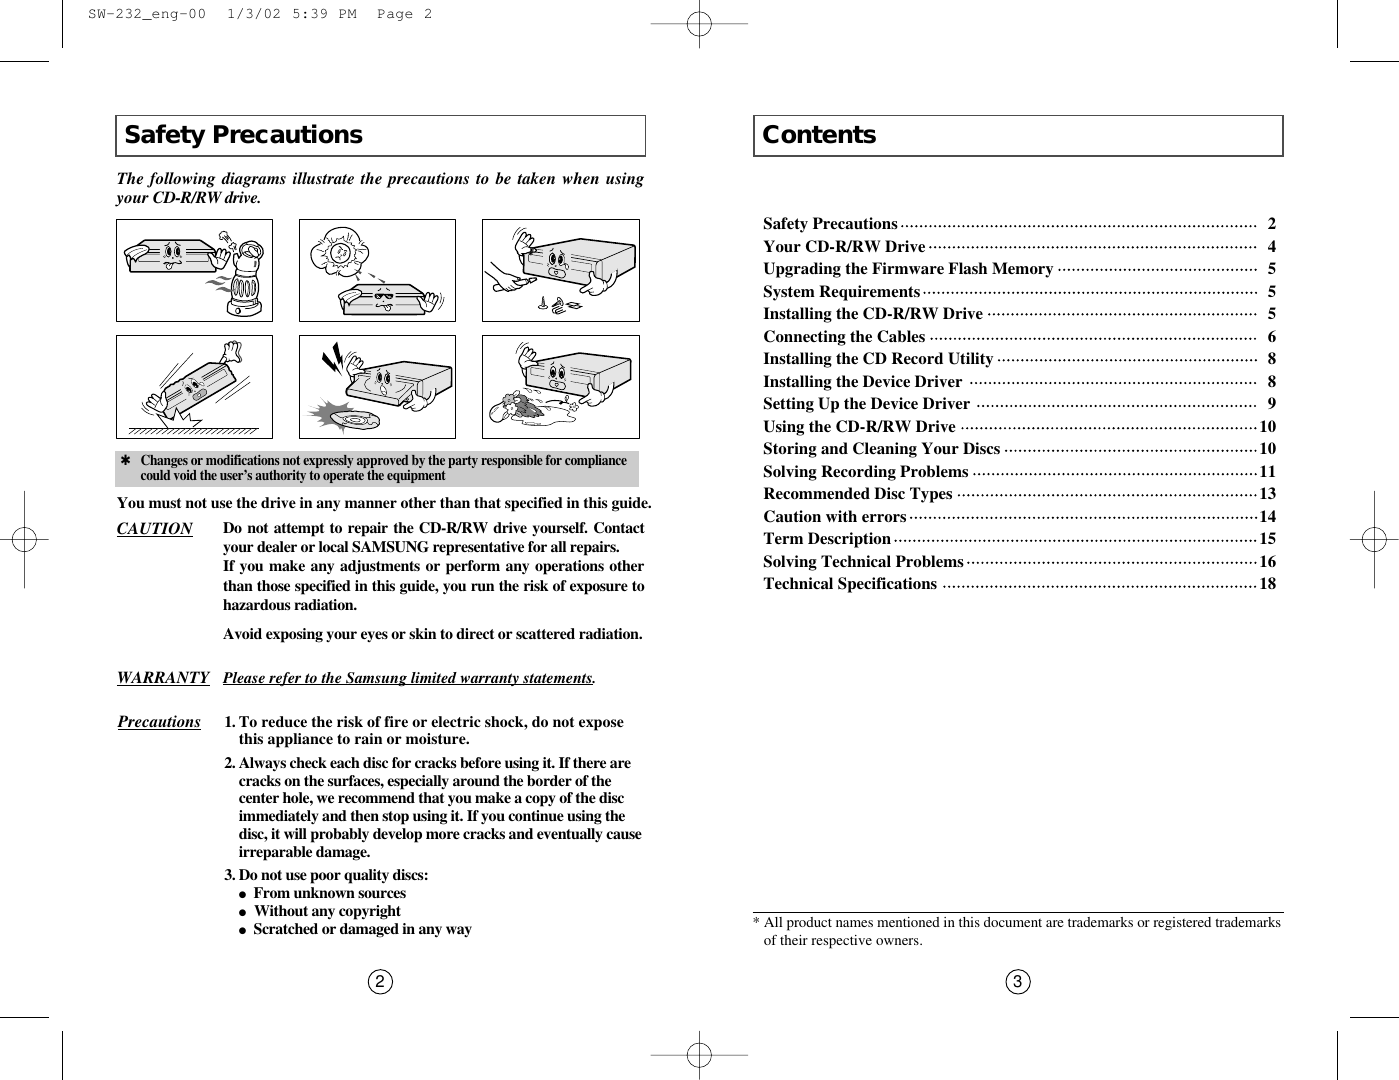 Contents3Safety Precautions2The following diagrams illustrate the precautions to be taken when usingyour CD-R/RW drive. You must not use the drive in any manner other than that specified in this guide.✱Changes or modifications not expressly approved by the party responsible for compliancecould void the user’s authority to operate the equipmentAvoid exposing your eyes or skin to direct or scattered radiation.CAUTION Do not attempt to repair the CD-R/RW drive yourself. Contactyour dealer or local SAMSUNG representative for all repairs.If you make any adjustments or perform any operations otherthan those specified in this guide, you run the risk of exposure tohazardous radiation.WARRANTY Please refer to the Samsung limited warranty statements.Precautions 1.To reduce the risk of fire or electric shock, do not exposethis appliance to rain or moisture.2. Always check each disc for cracks before using it. If there arecracks on the surfaces, especially around the border of thecenter hole, we recommend that you make a copy of the discimmediately and then stop using it. If you continue using thedisc, it will probably develop more cracks and eventually causeirreparable damage.3. Do not use poor quality discs:●From unknown sources●  Without any copyright●Scratched or damaged in any way * All product names mentioned in this document are trademarks or registered trademarksof their respective owners.Safety Precautions 2Your CD-R/RW Drive 4Upgrading the Firmware Flash Memory 5System Requirements 5Installing the CD-R/RW Drive  5Connecting the Cables  6Installing the CD Record Utility  8Installing the Device Driver  8Setting Up the Device Driver  9Using the CD-R/RW Drive  10Storing and Cleaning Your Discs  10Solving Recording Problems 11Recommended Disc Types  13Caution with errors 14Term Description 15Solving Technical Problems  16Technical Specifications 18  SW-232_eng-00  1/3/02 5:39 PM  Page 2